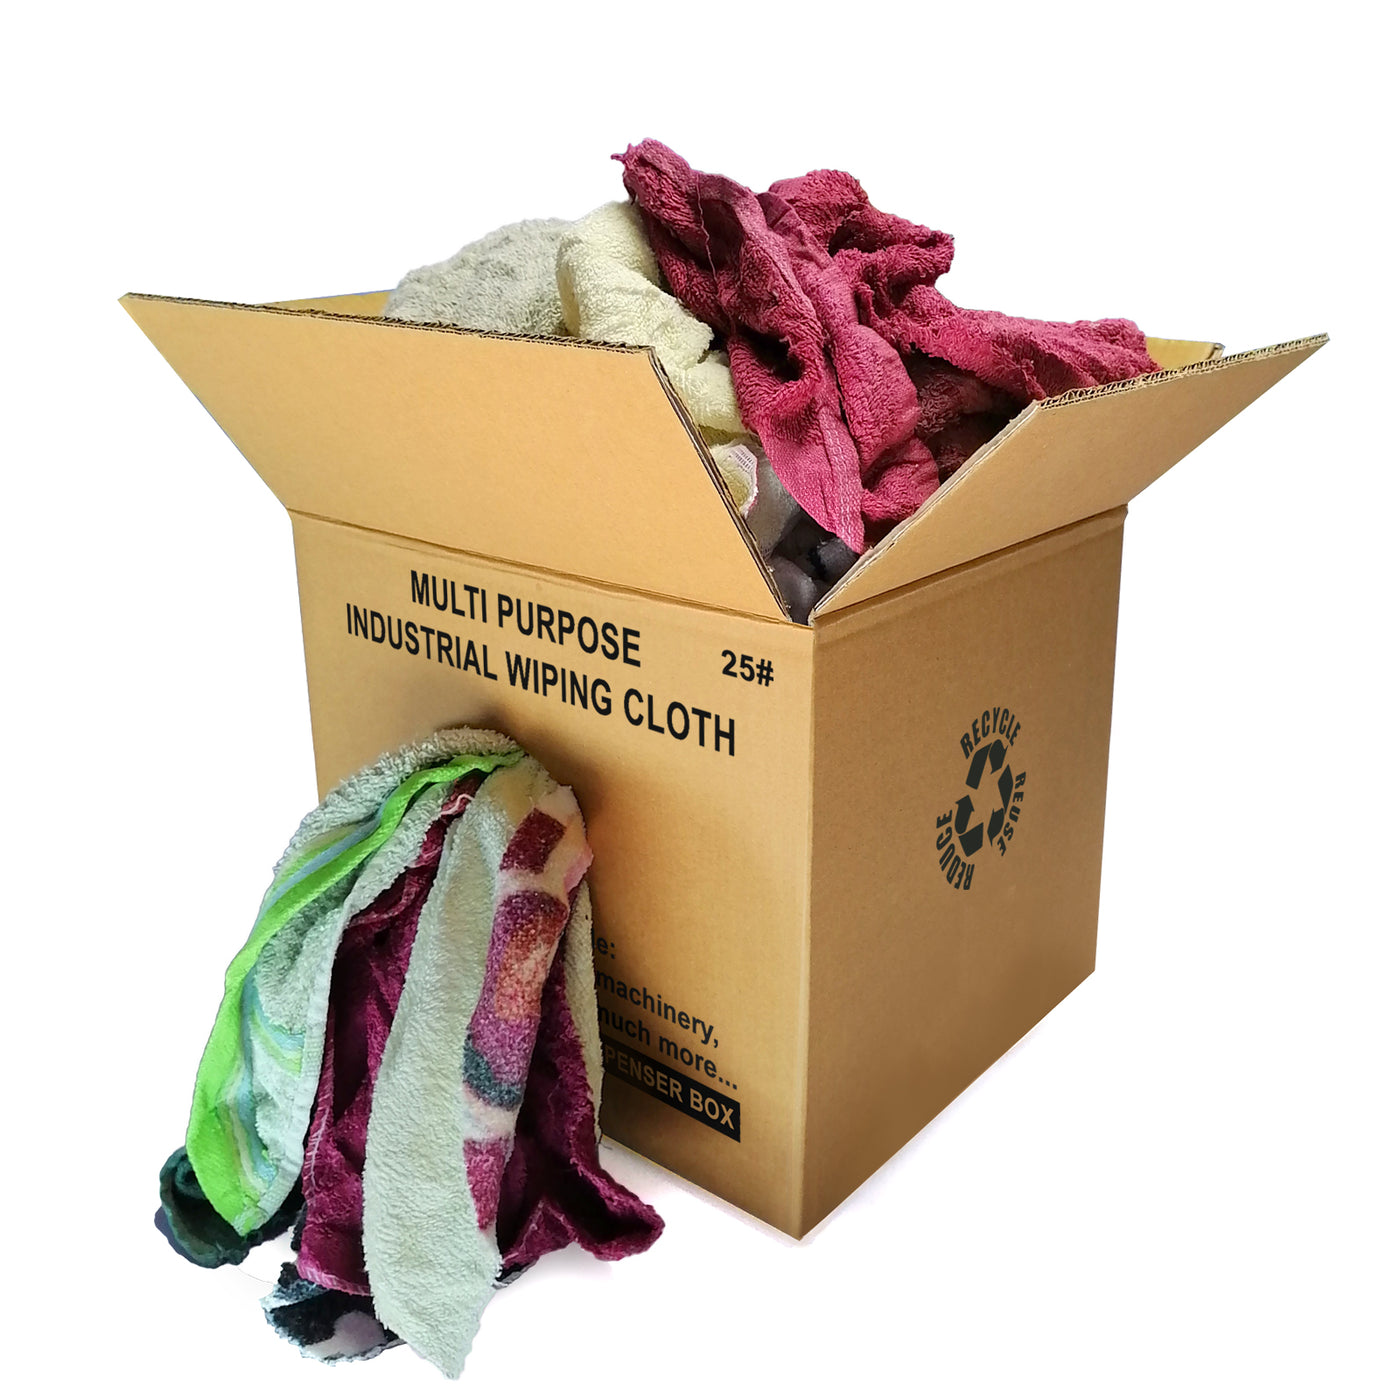 Affordable Wipers Color Terry Towel Cleaning Wiping Rags Shop Towels & Cloths - 25 lbs Box